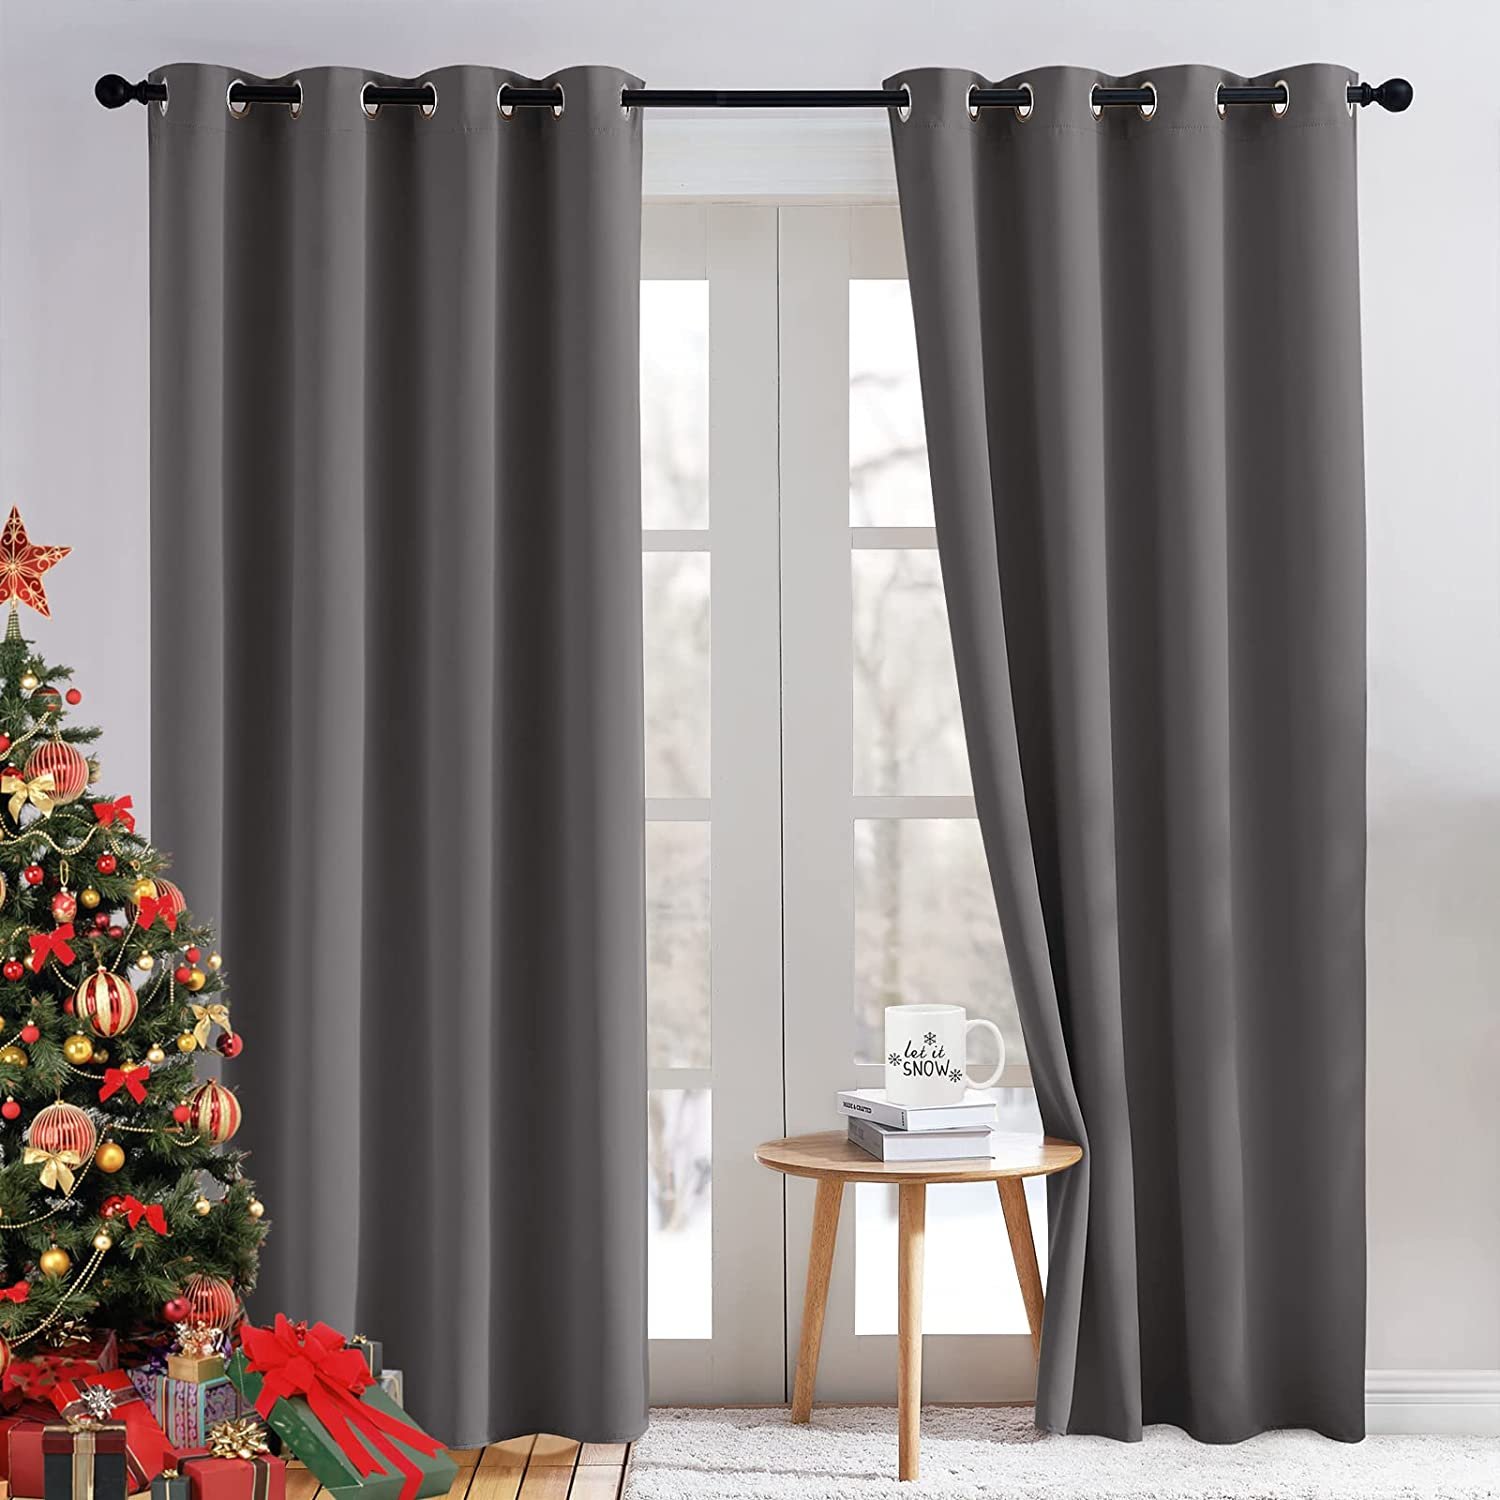 Blackout curtains. Grey curtains on a window.